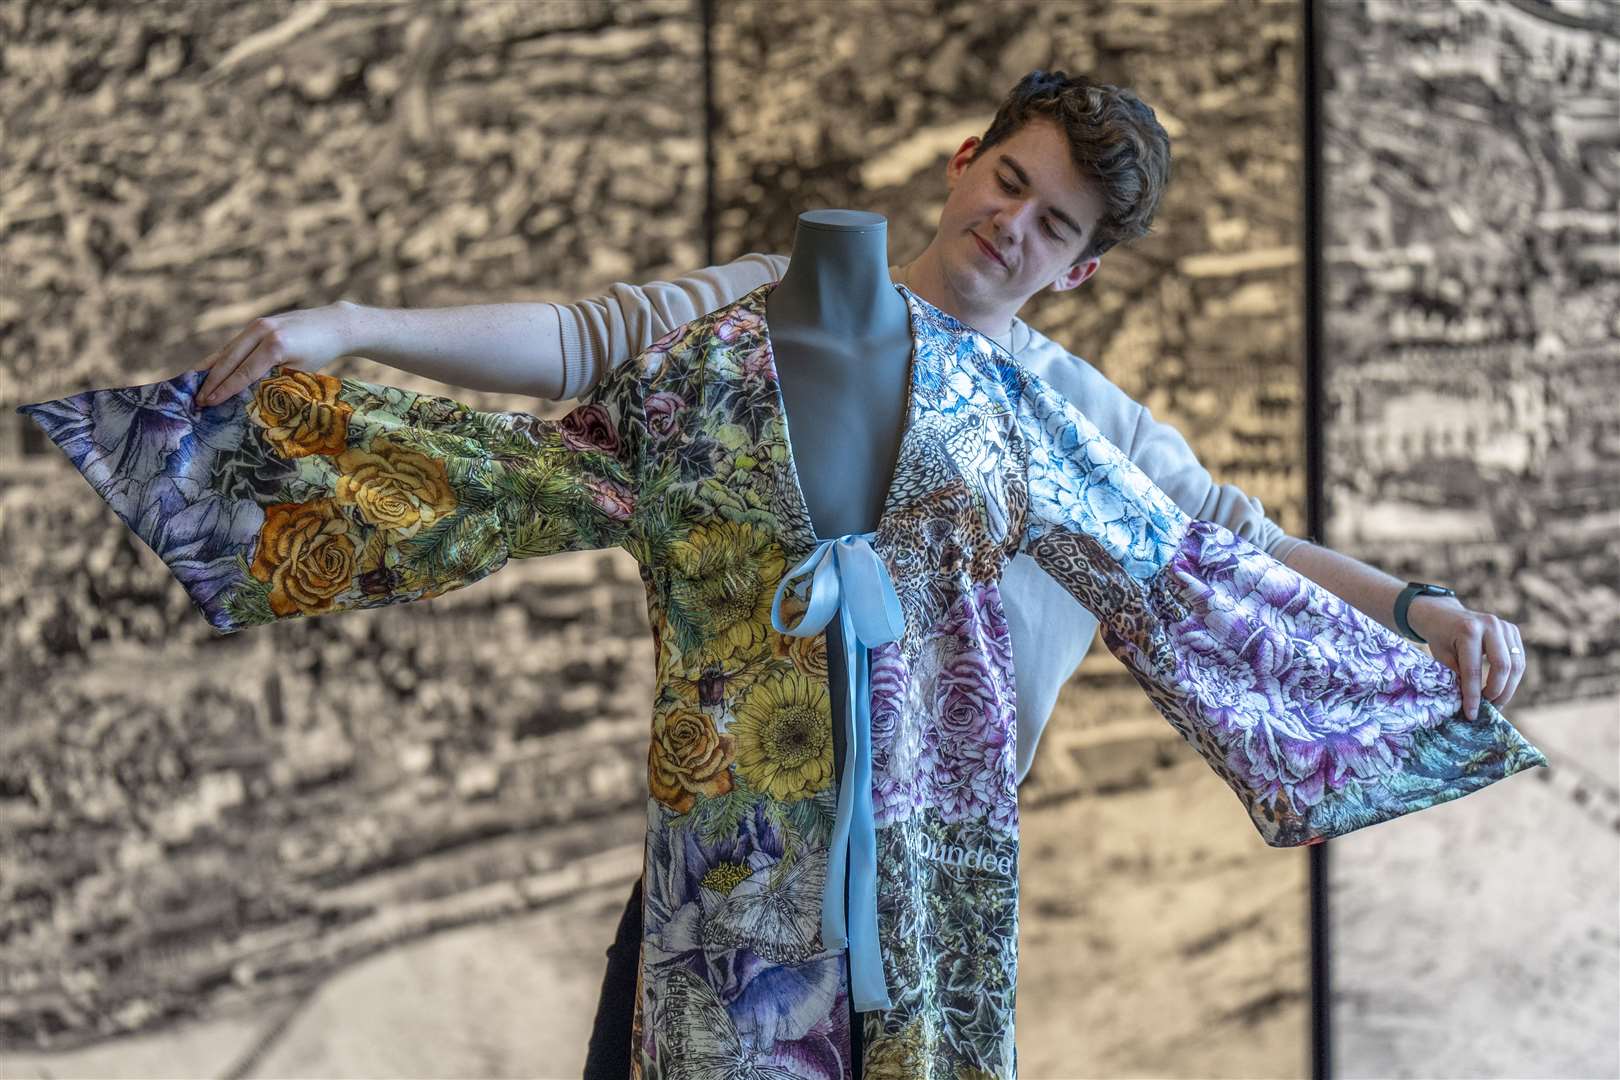 Museum content manager Chris Keatch takes a closer look at a kimono inspired by Taylor Swift’s music (Jane Barlow/PA)